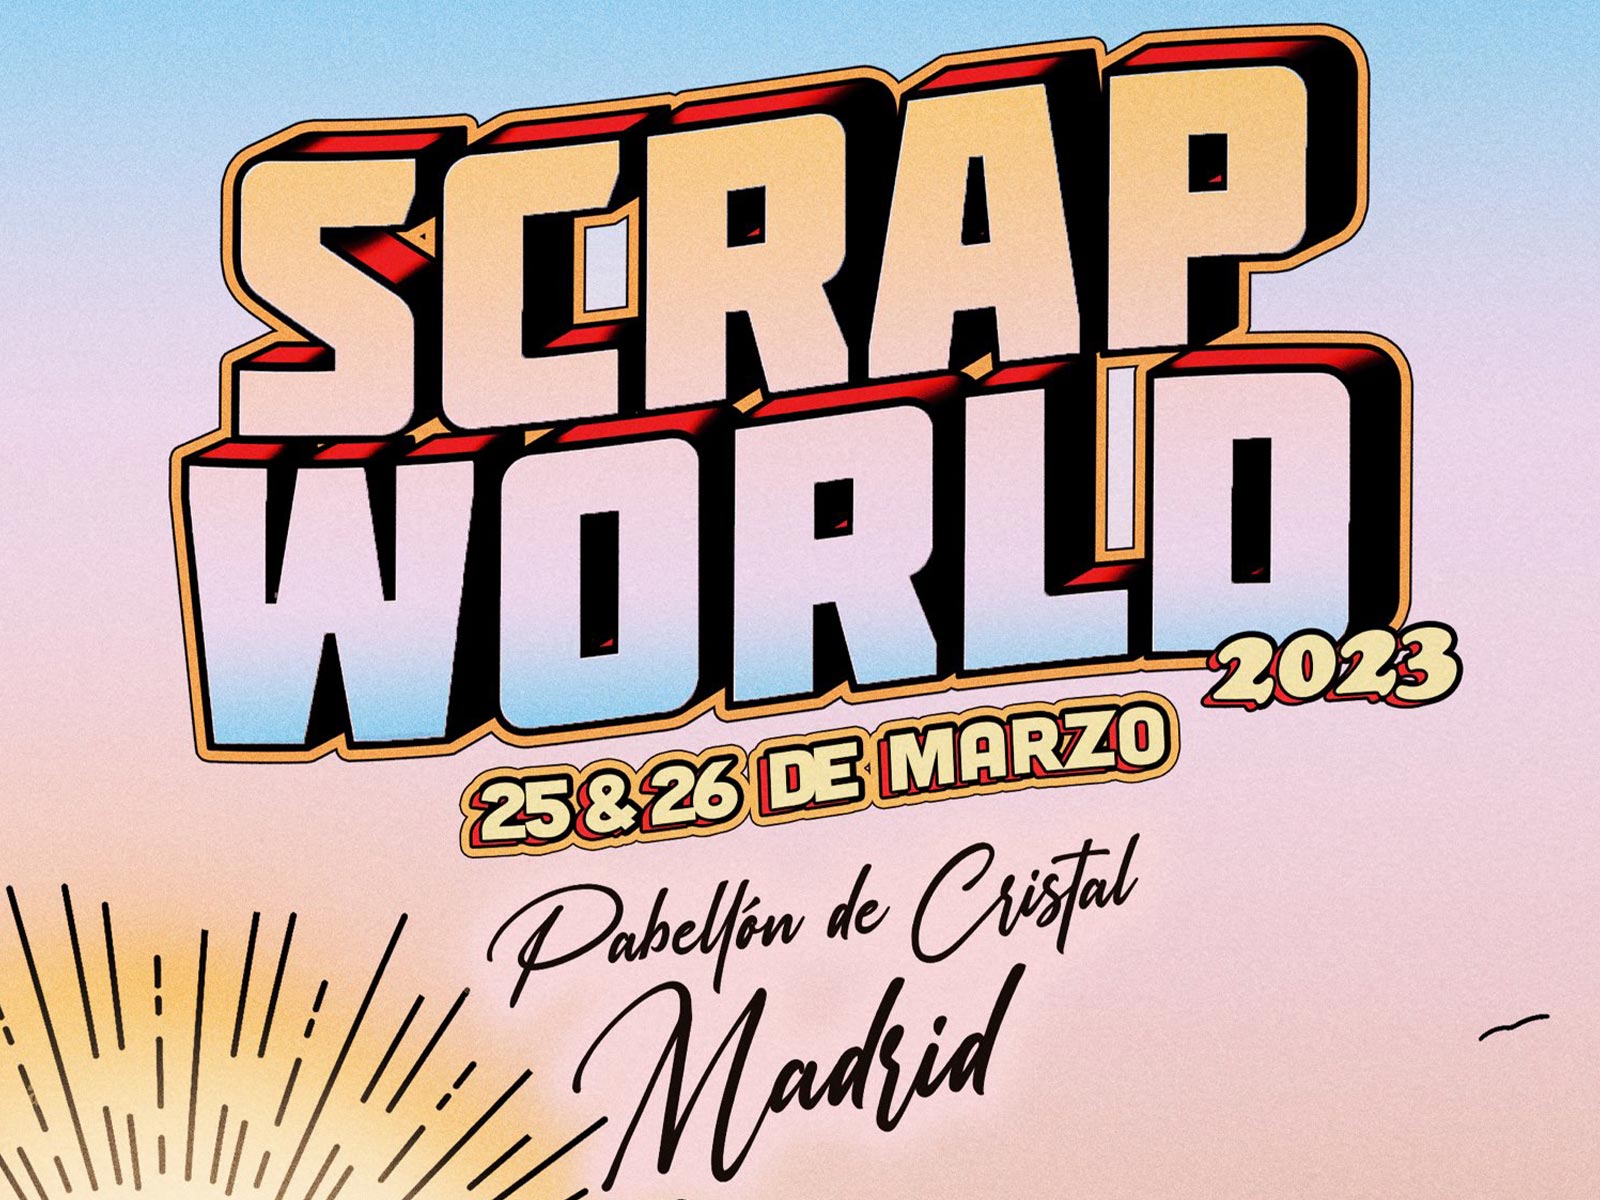 SCRAPWORLD unveils all the sponsoring brands for its next edition